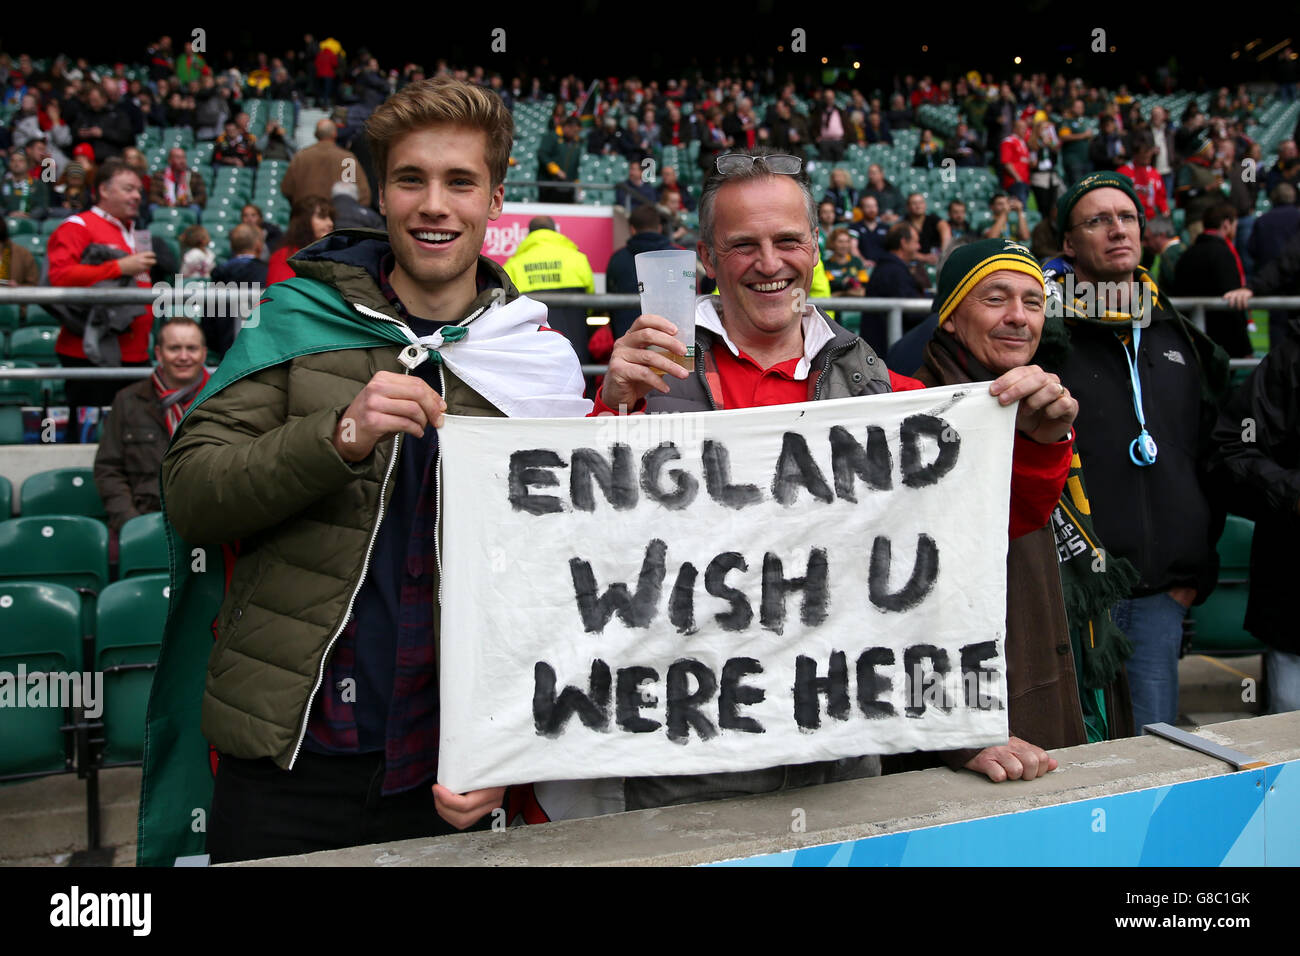 Wales fans in the stands with a sign reading 'England Wish U Were Here' during the Rugby World Cup game at Twickenham Stadium, London. Stock Photo